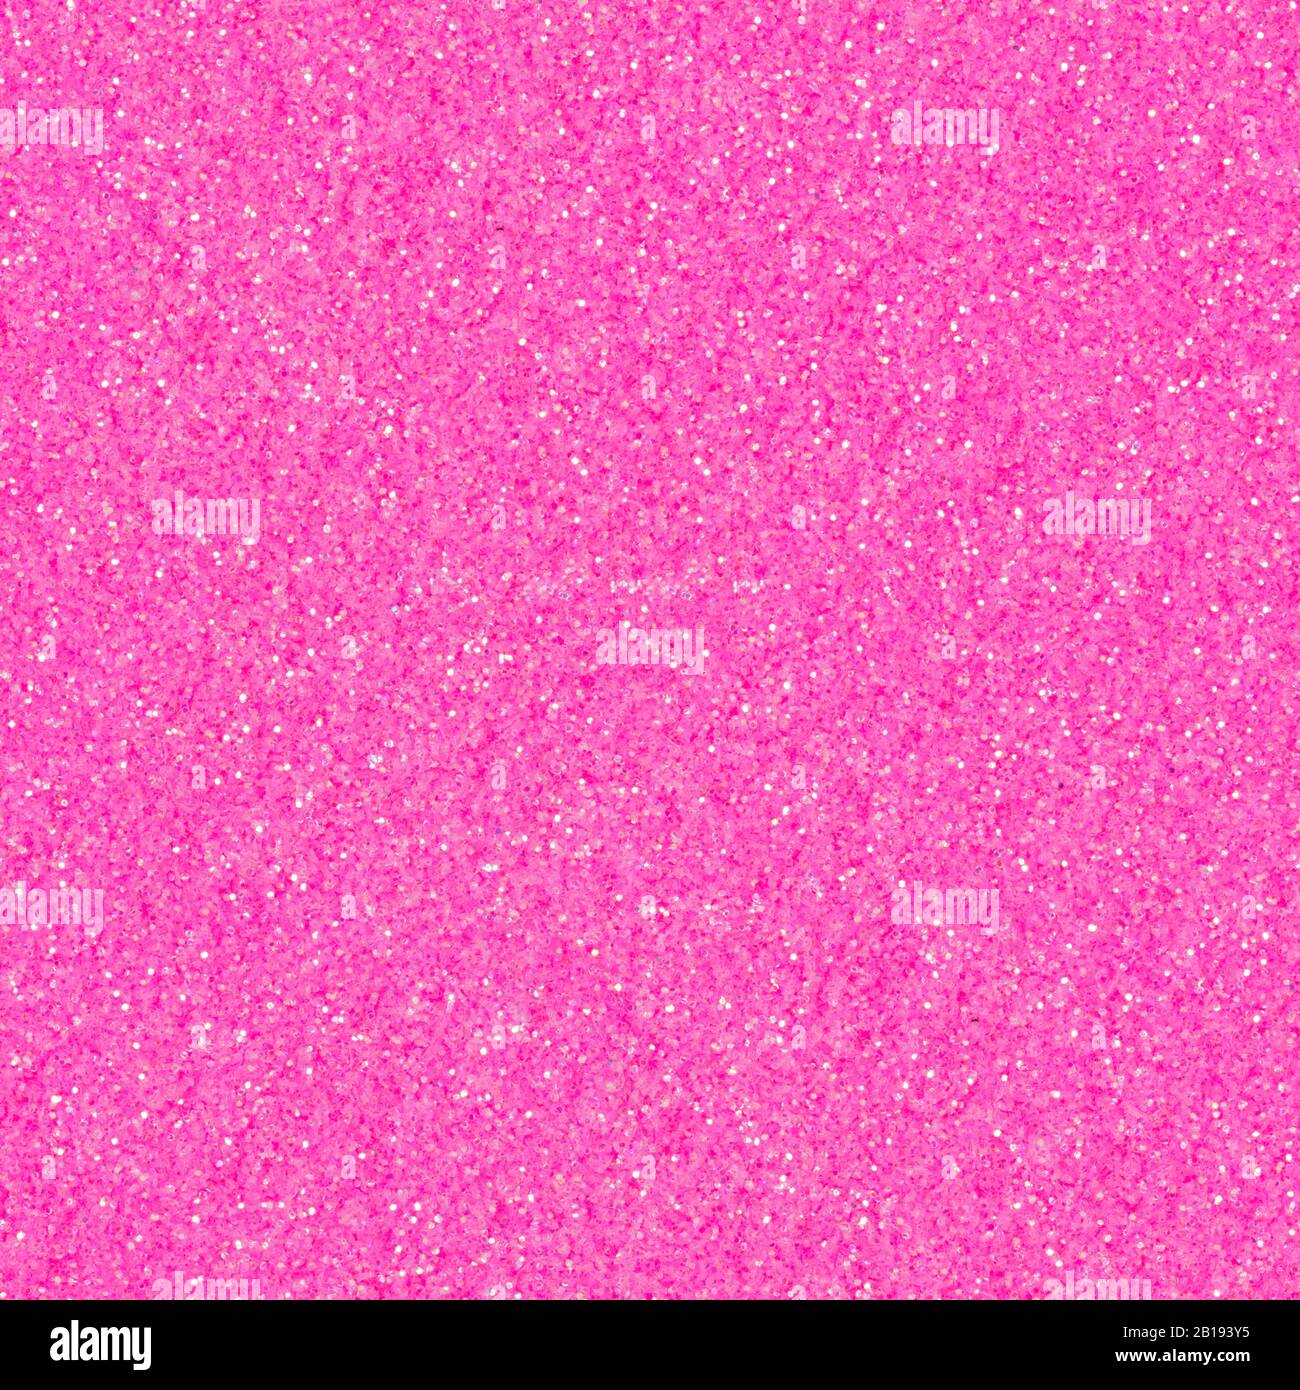 Hot bright pink glitter, sparkle confetti texture. Christmas abstract background, seamless pattern. Stock Photo